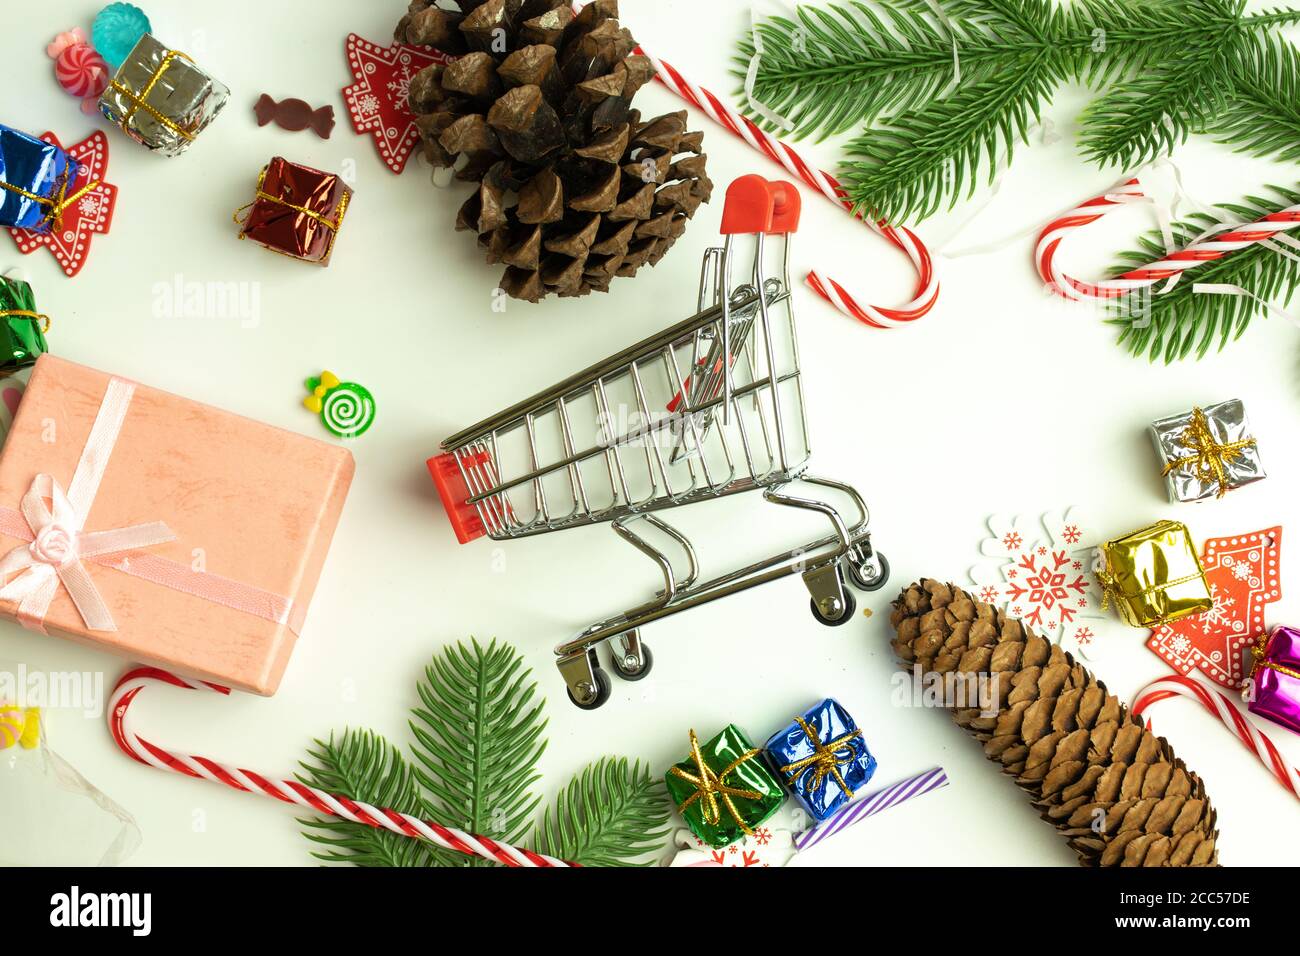 Shopping cart in the center of Christmas decorations on white background. Flat lay. Buying presents on New Year holidays concept Stock Photo